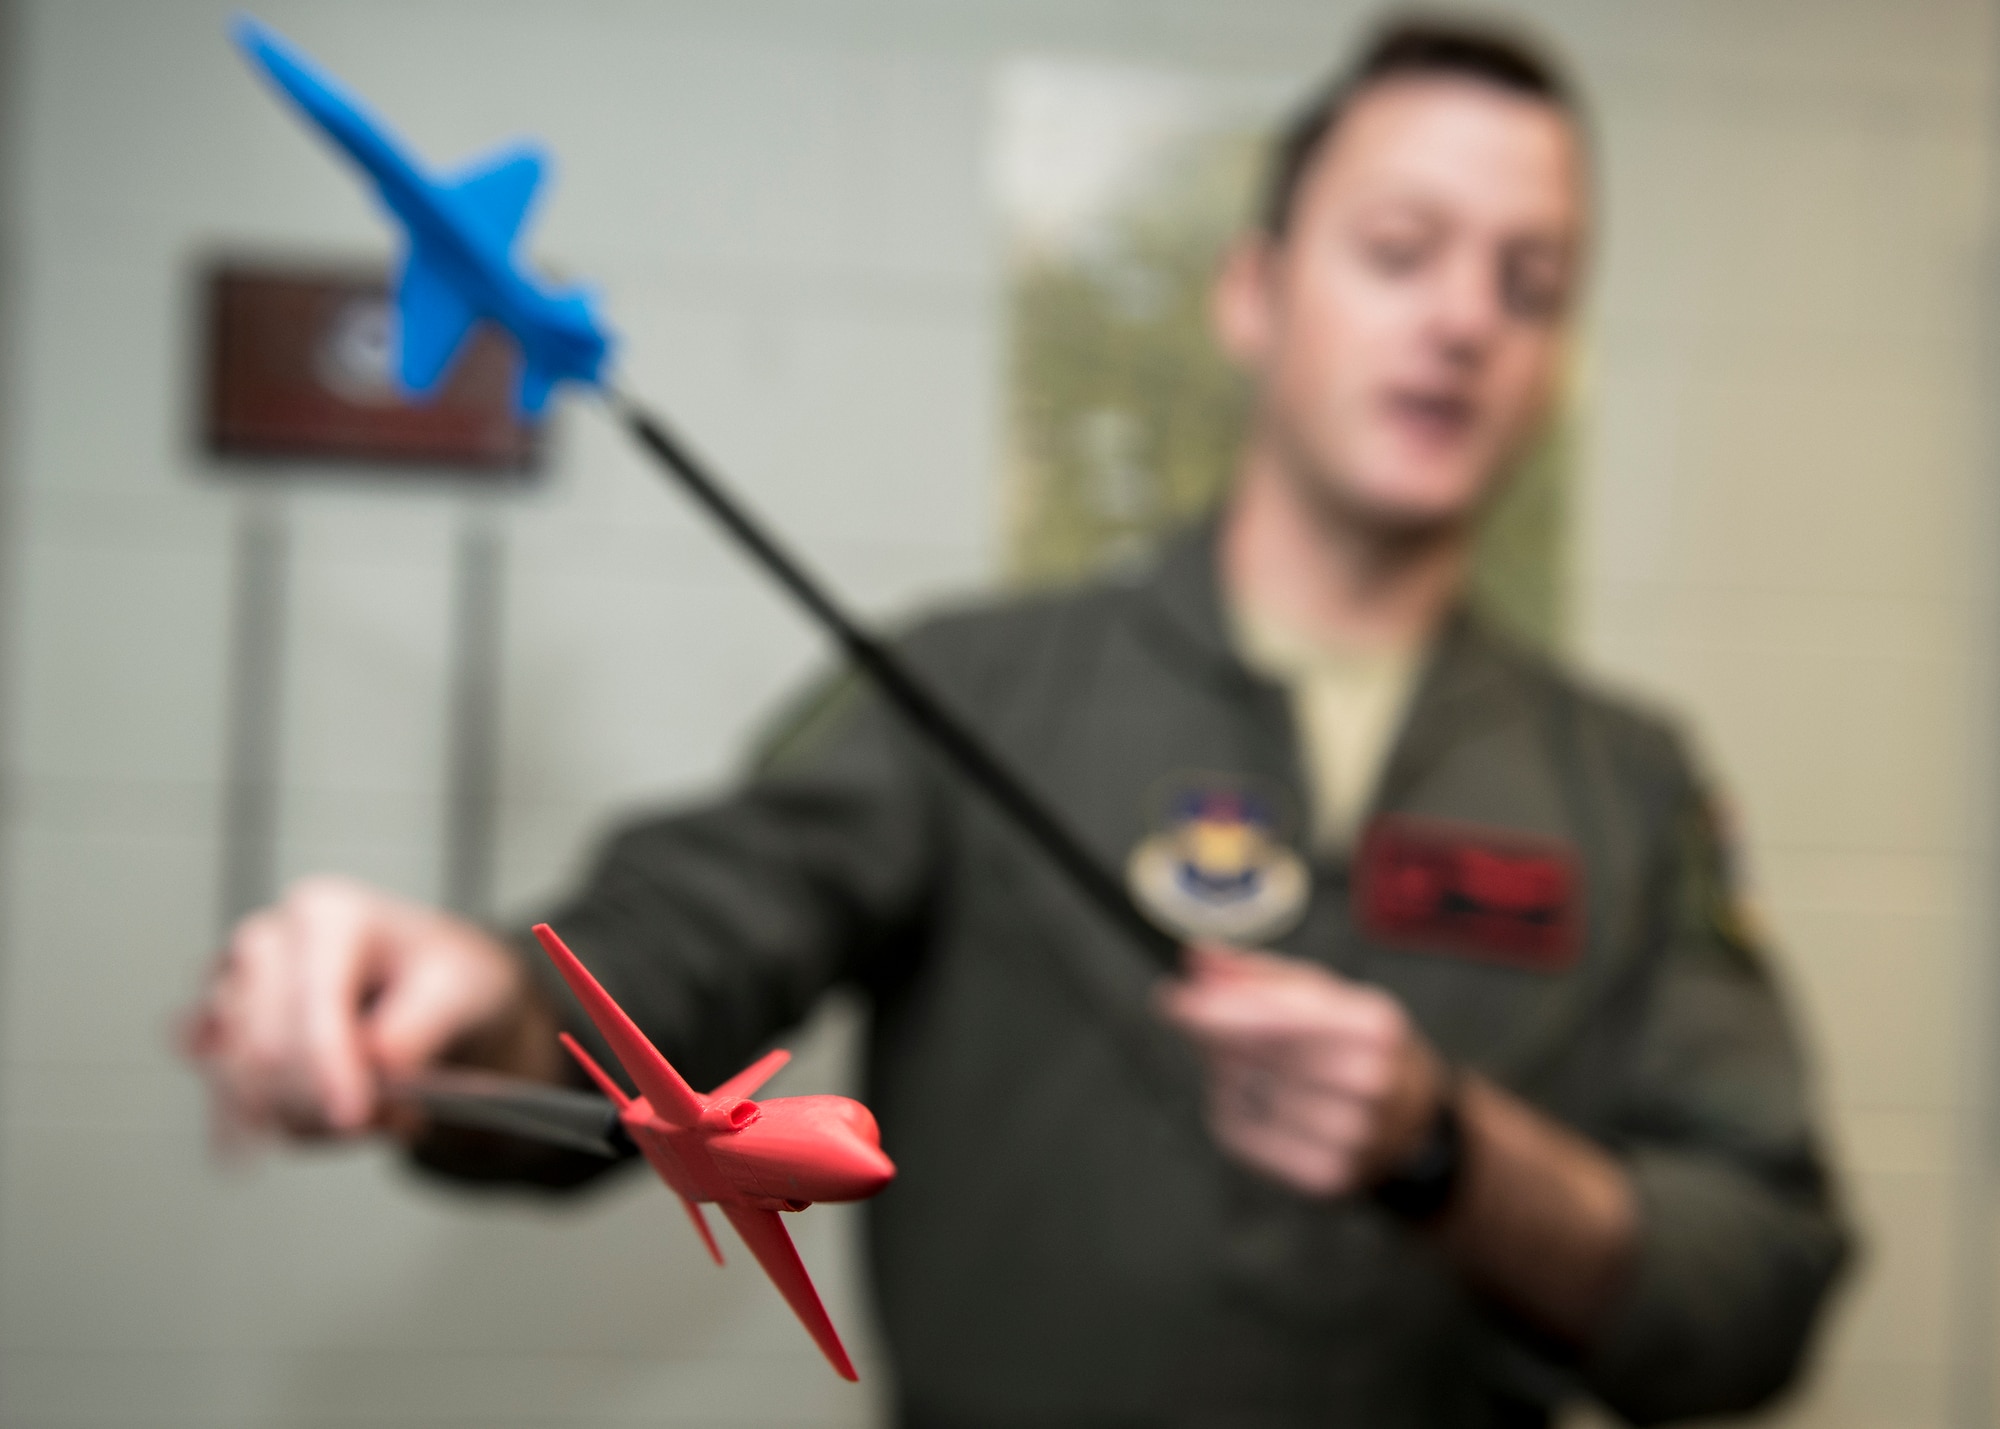 An Euro-NATO Joint Jet Pilot Training Program student pilot uses red and blue planes to show aircraft formation types at Sheppard Air Force Base, Texas, Dec. 10, 2019. The red plane represents the "bandit plane" which basically means the "bad" plane, while the blue plane represents the ENJJPT pilot. Using the red and blue planes, the instructor can show different scenarios and where the ENJJPT pilots should be in each situation. (U.S. Air Force photo by Senior Airman Pedro Tenorio)